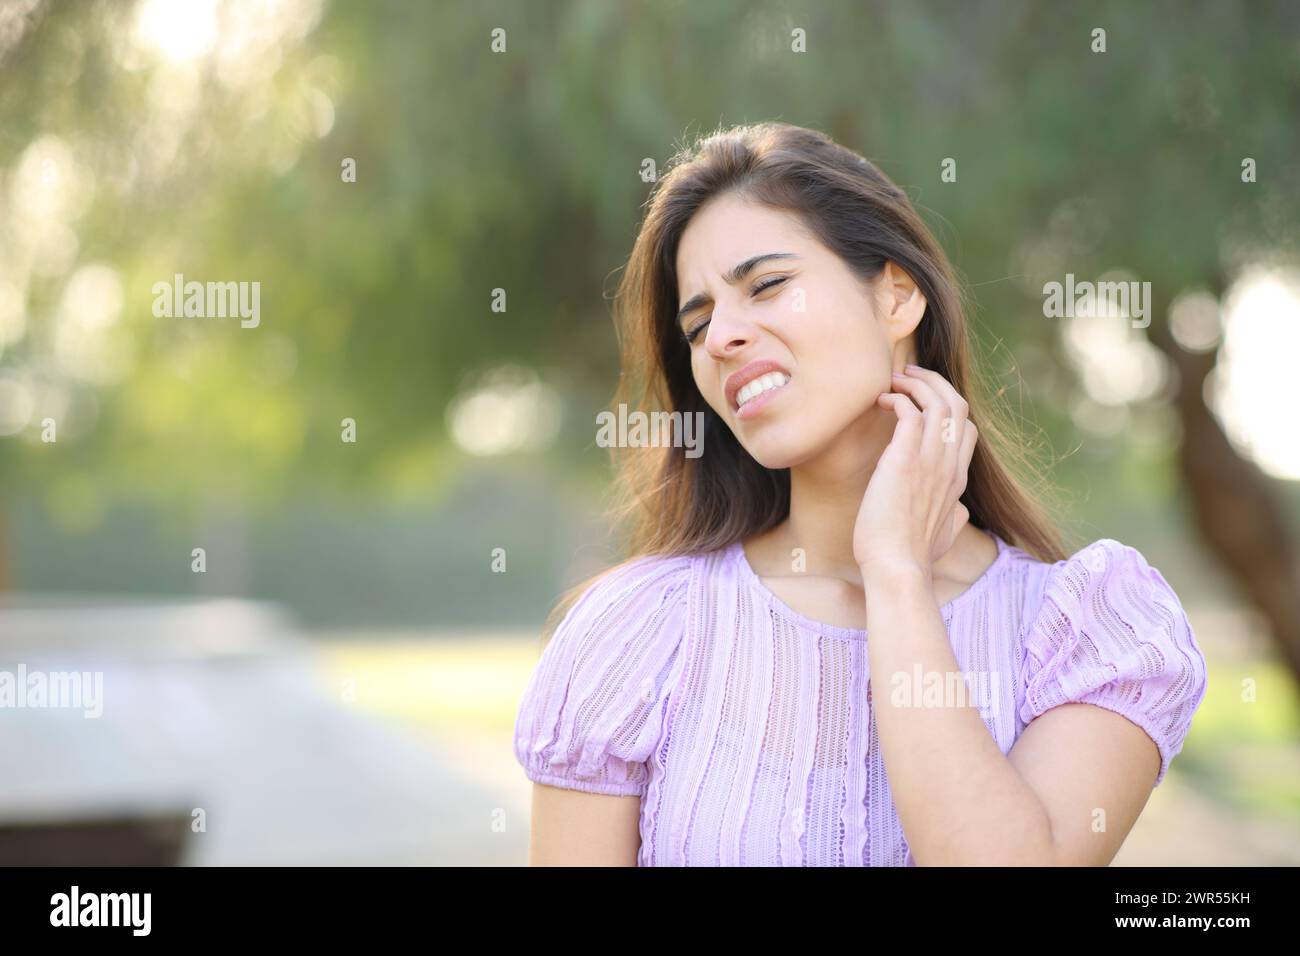 Stressed woman scratching neck standing in a park Stock Photo